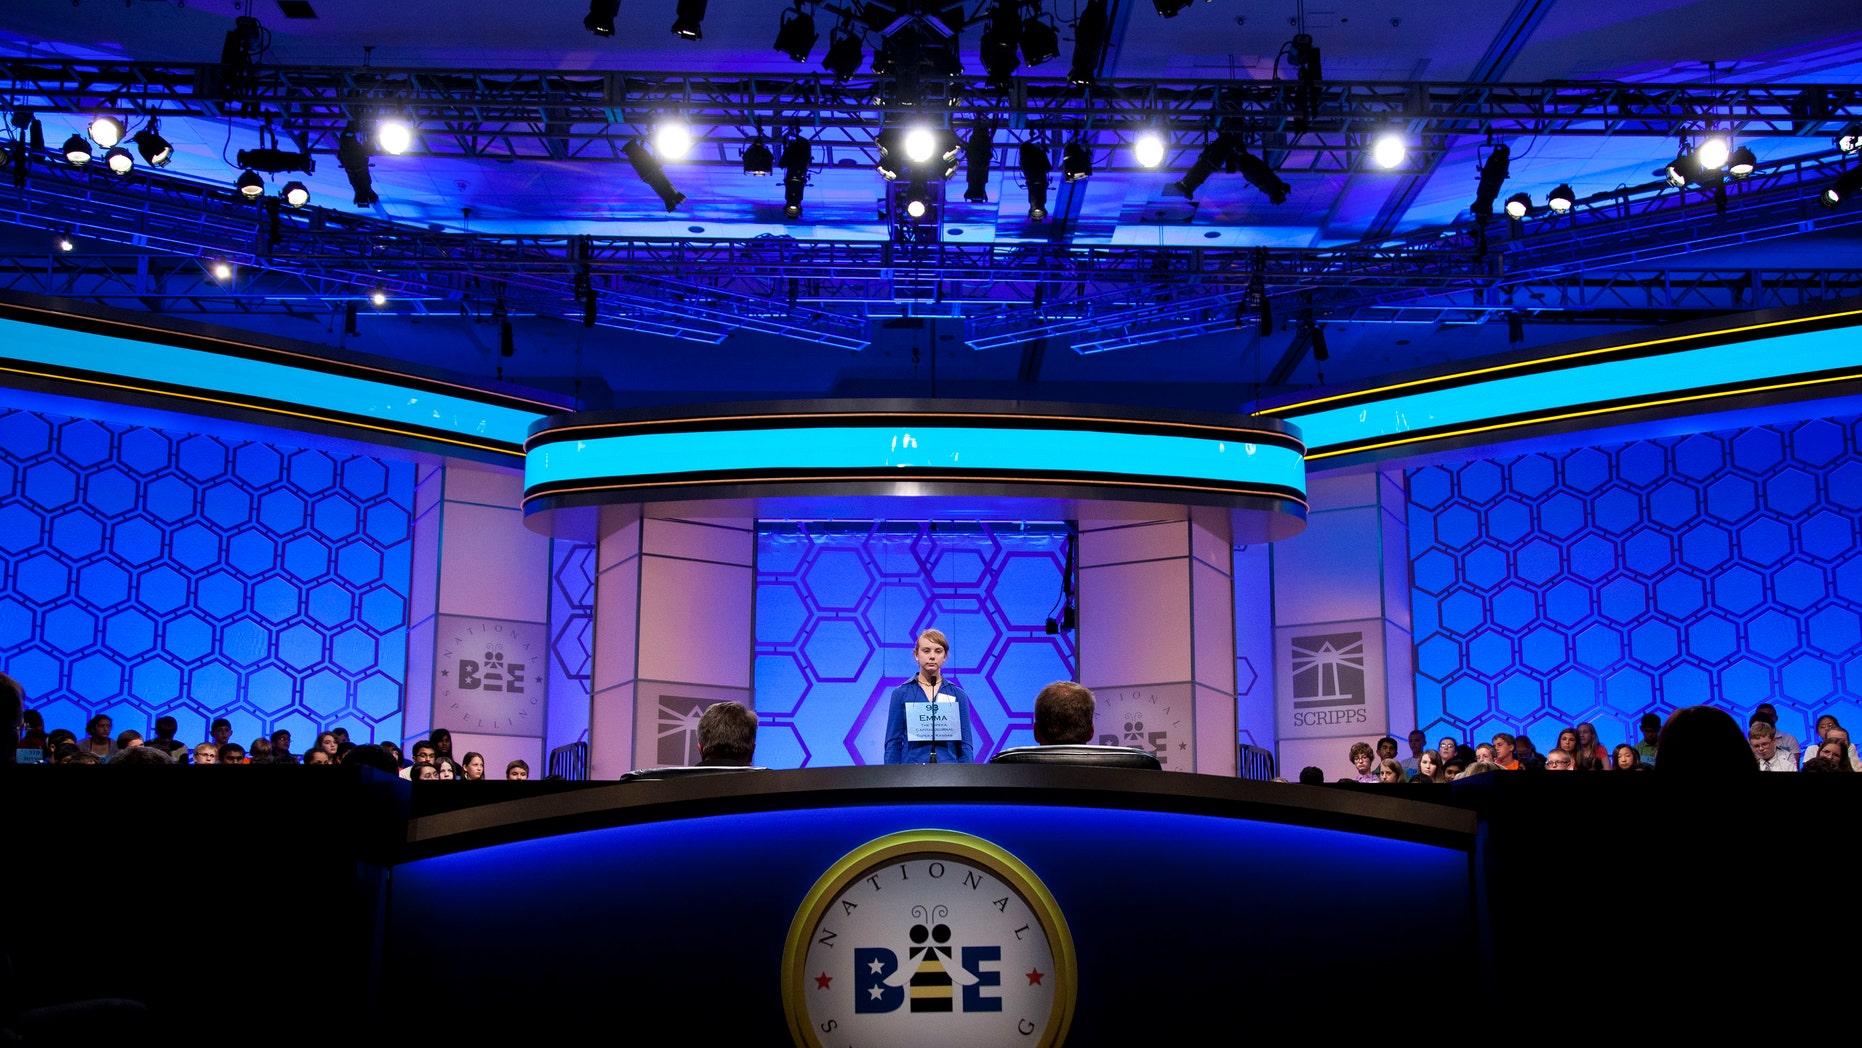 50 Spellers Move On To The National Spelling Bee Semifinals